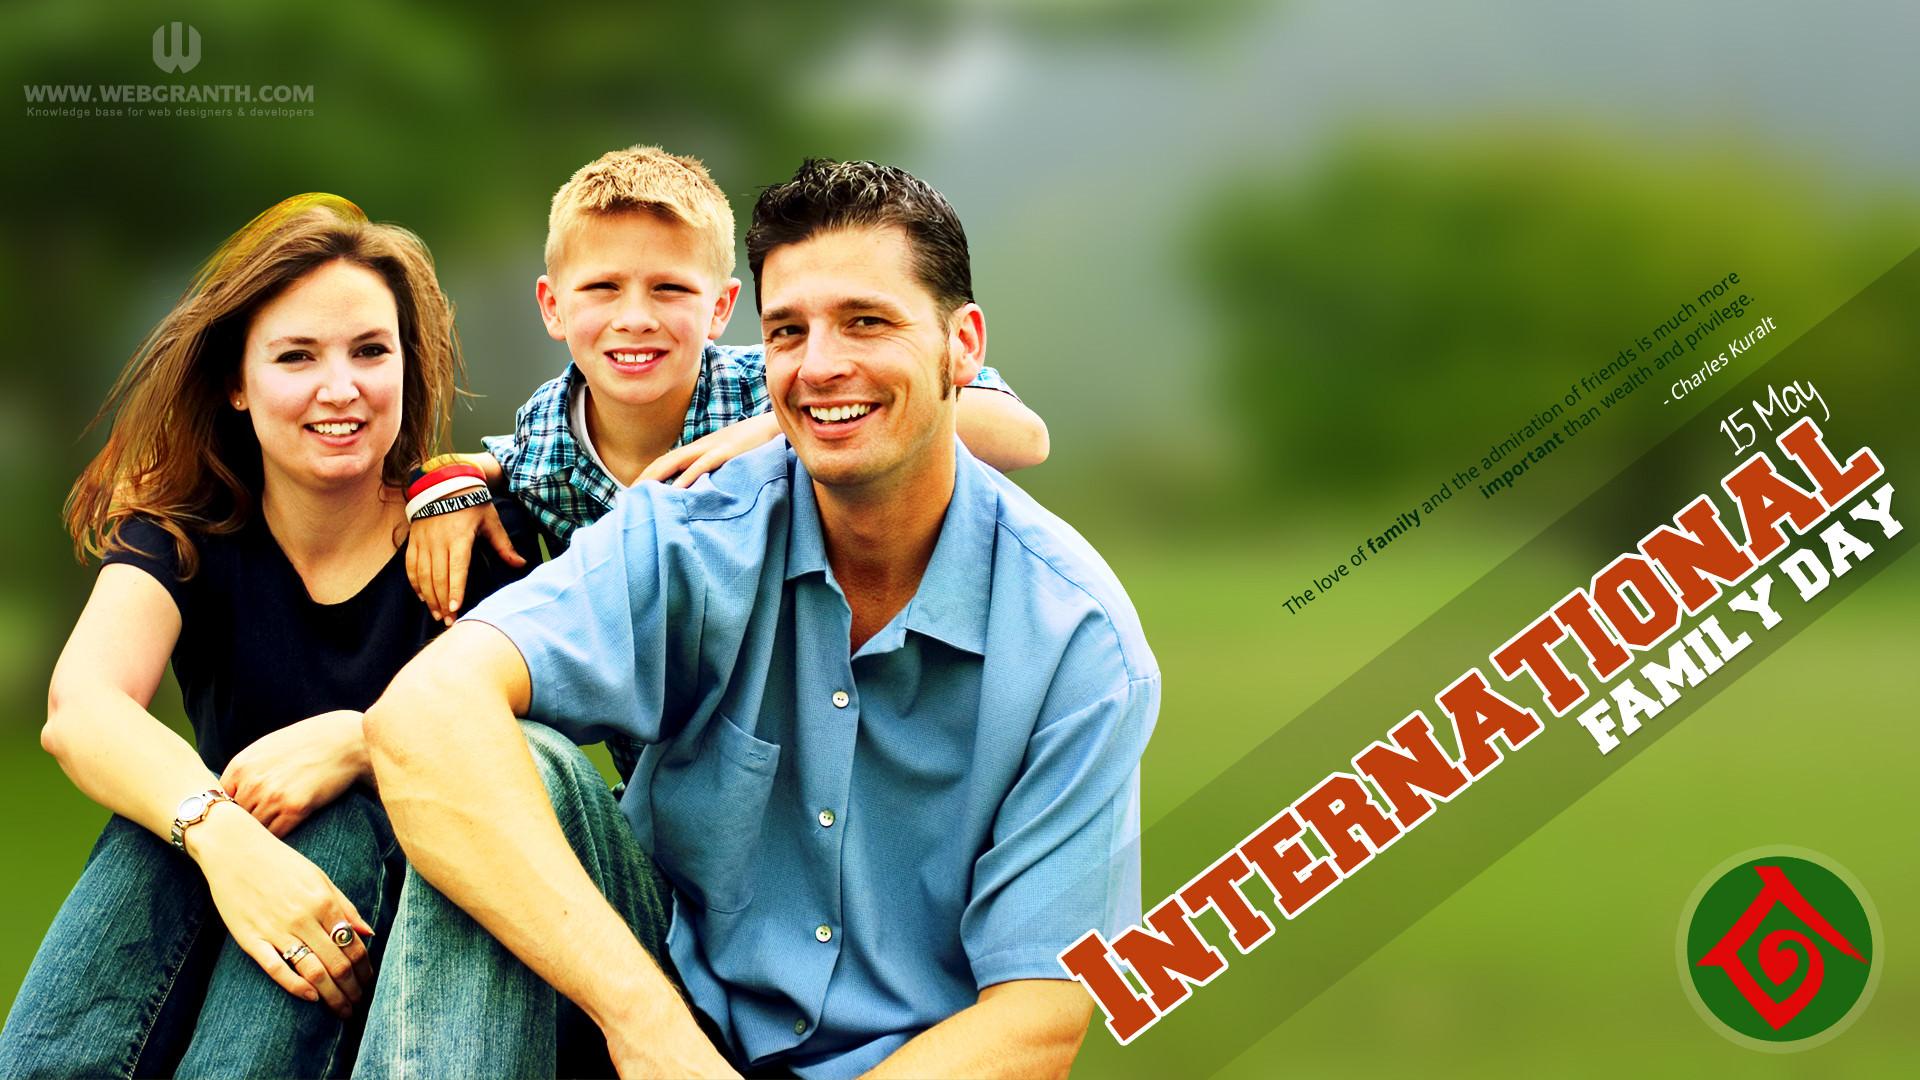 HD International Family Day Wallpaper (3): View HD Image of HD